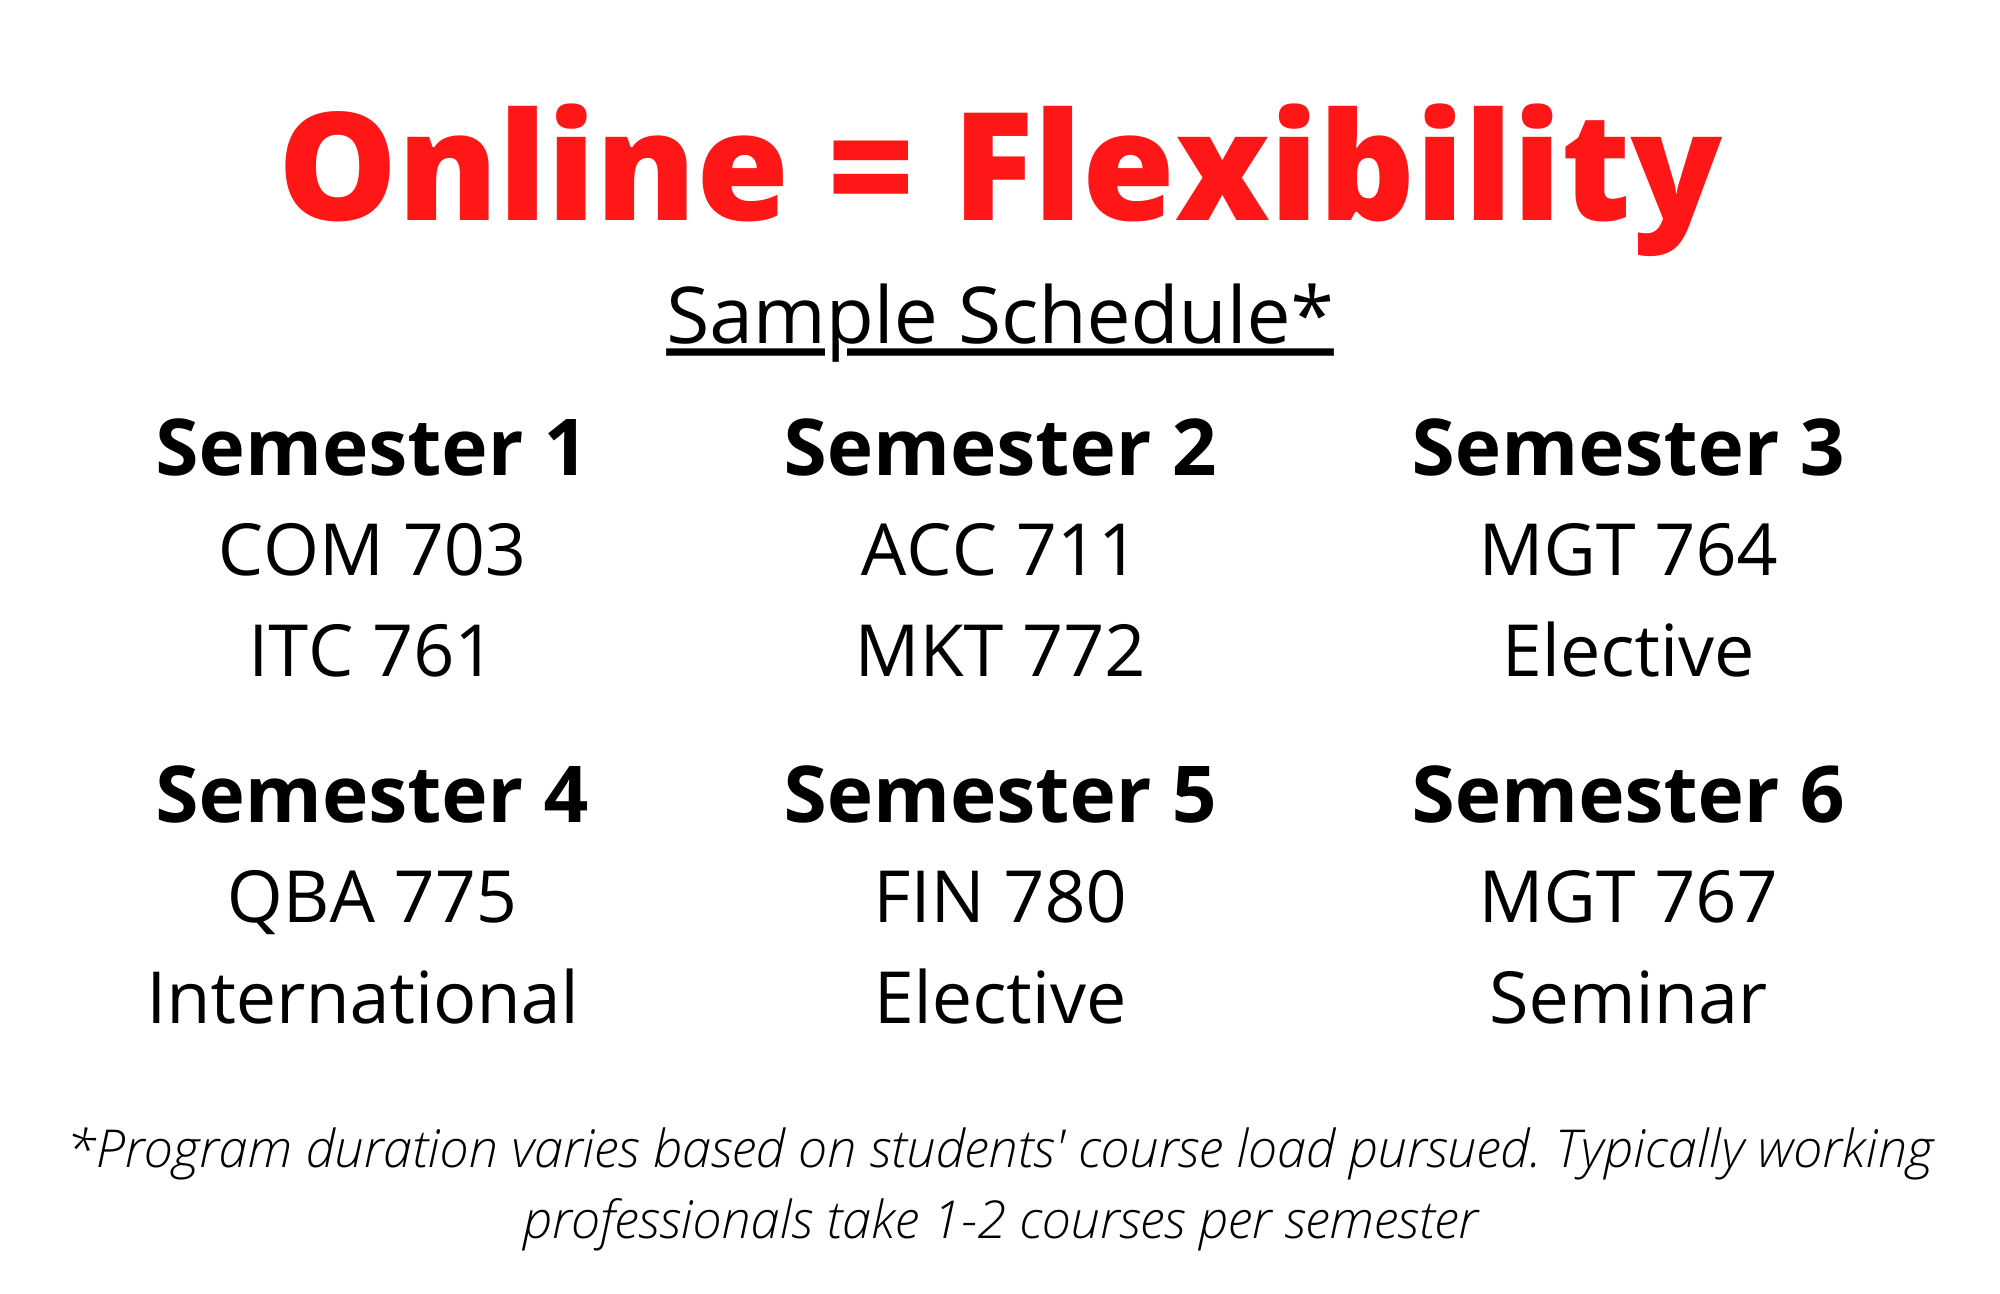 Online equals flexibility. Sample six-semester schedule outlined